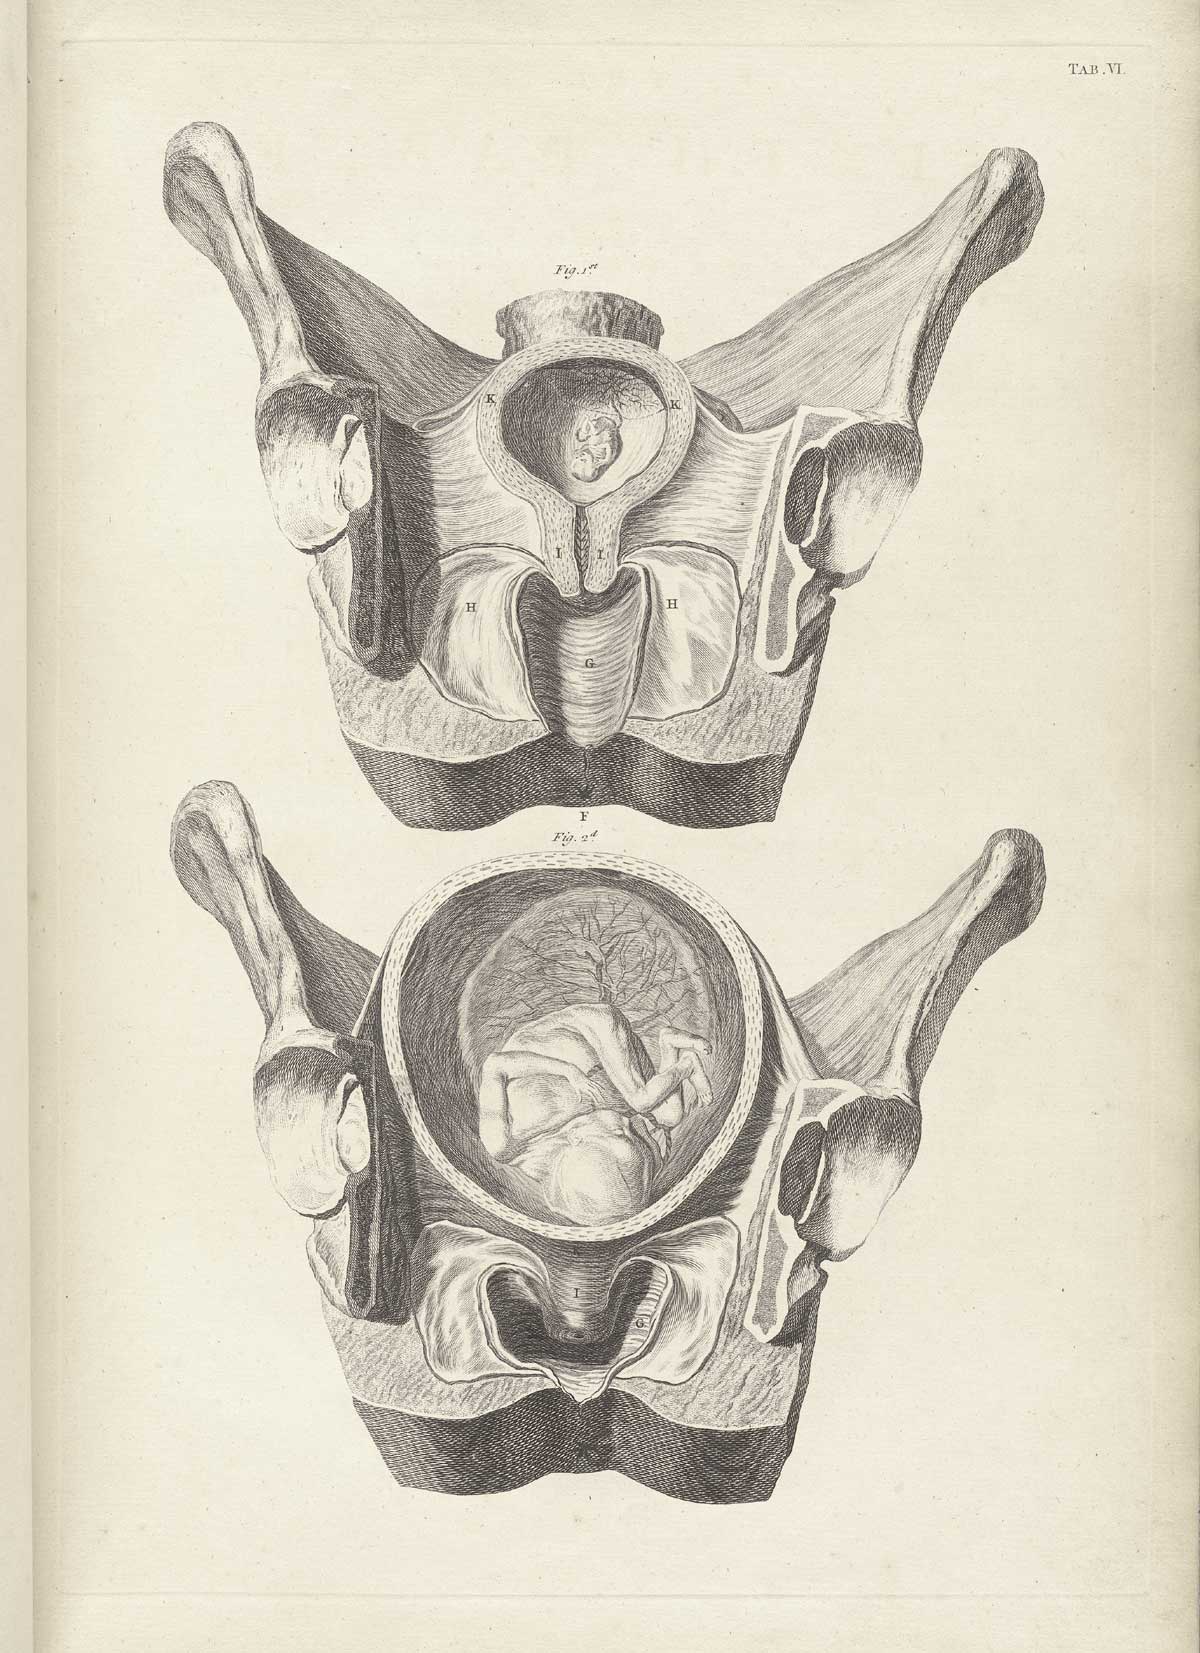 Table 6 of William Smellie's A sett of anatomical tables, with explanations, and an abridgment, of the practice of midwifery, featuring the two illustrated drawings of a woman's pelvis and uterus with a fetus in two stages of growth.